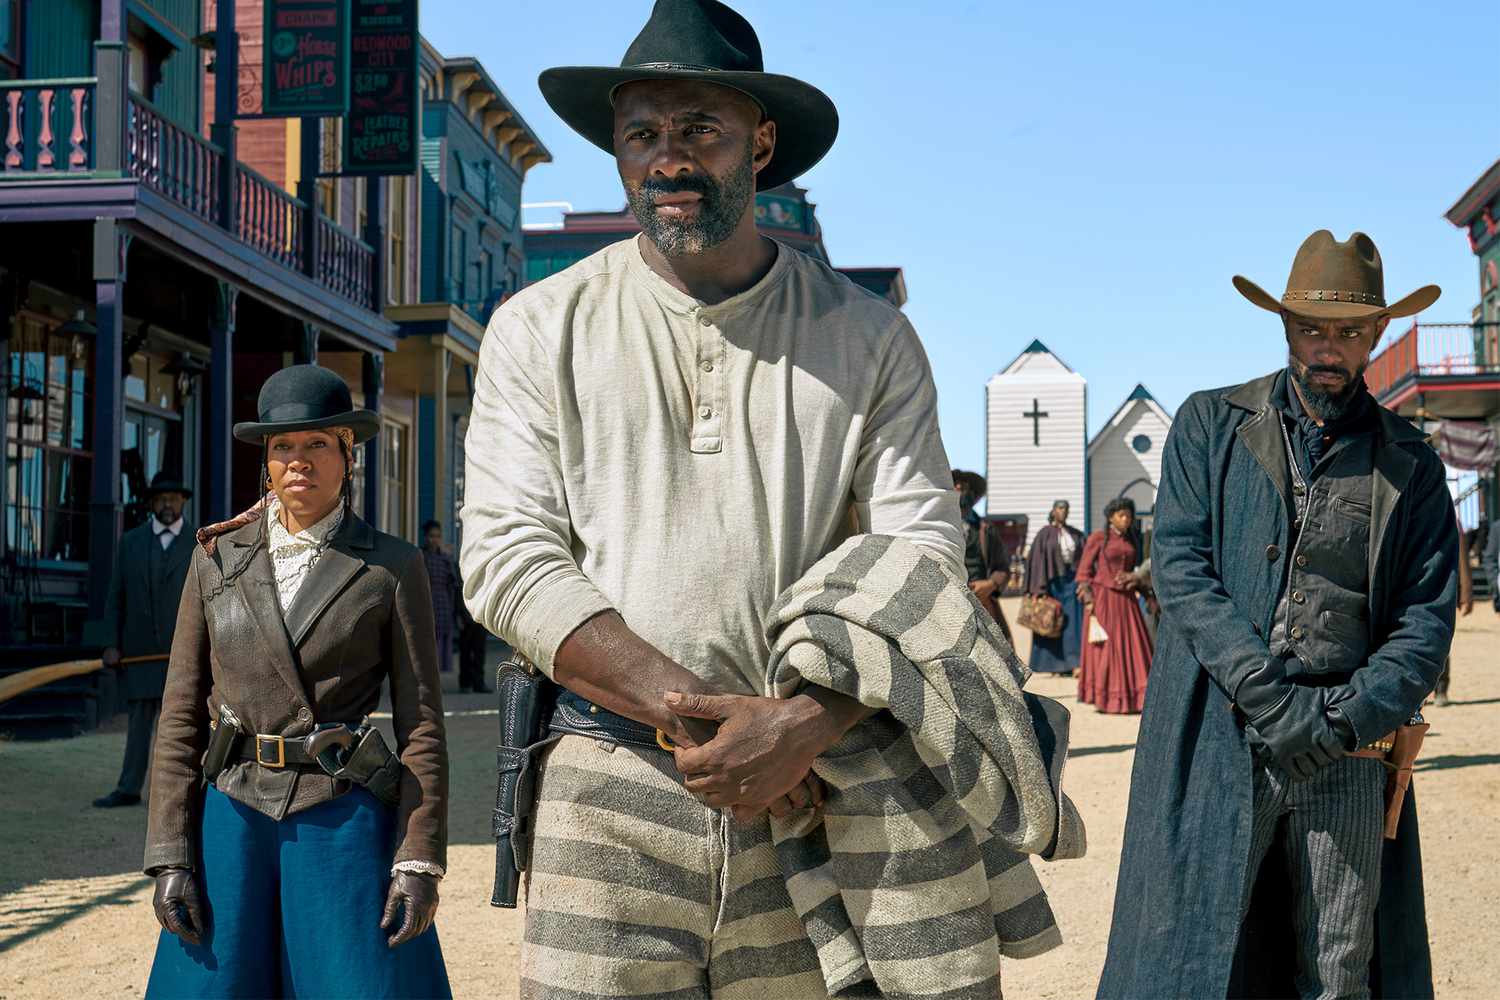 THE HARDER THEY FALL (L to R): REGINA KING as TRUDY SMITH, IDRIS ELBA as RUFUS BUCK, LAKEITH STANFIELD as CHEROKEE BILL. CR: DAVID LEE/NETFLIX†© 2021